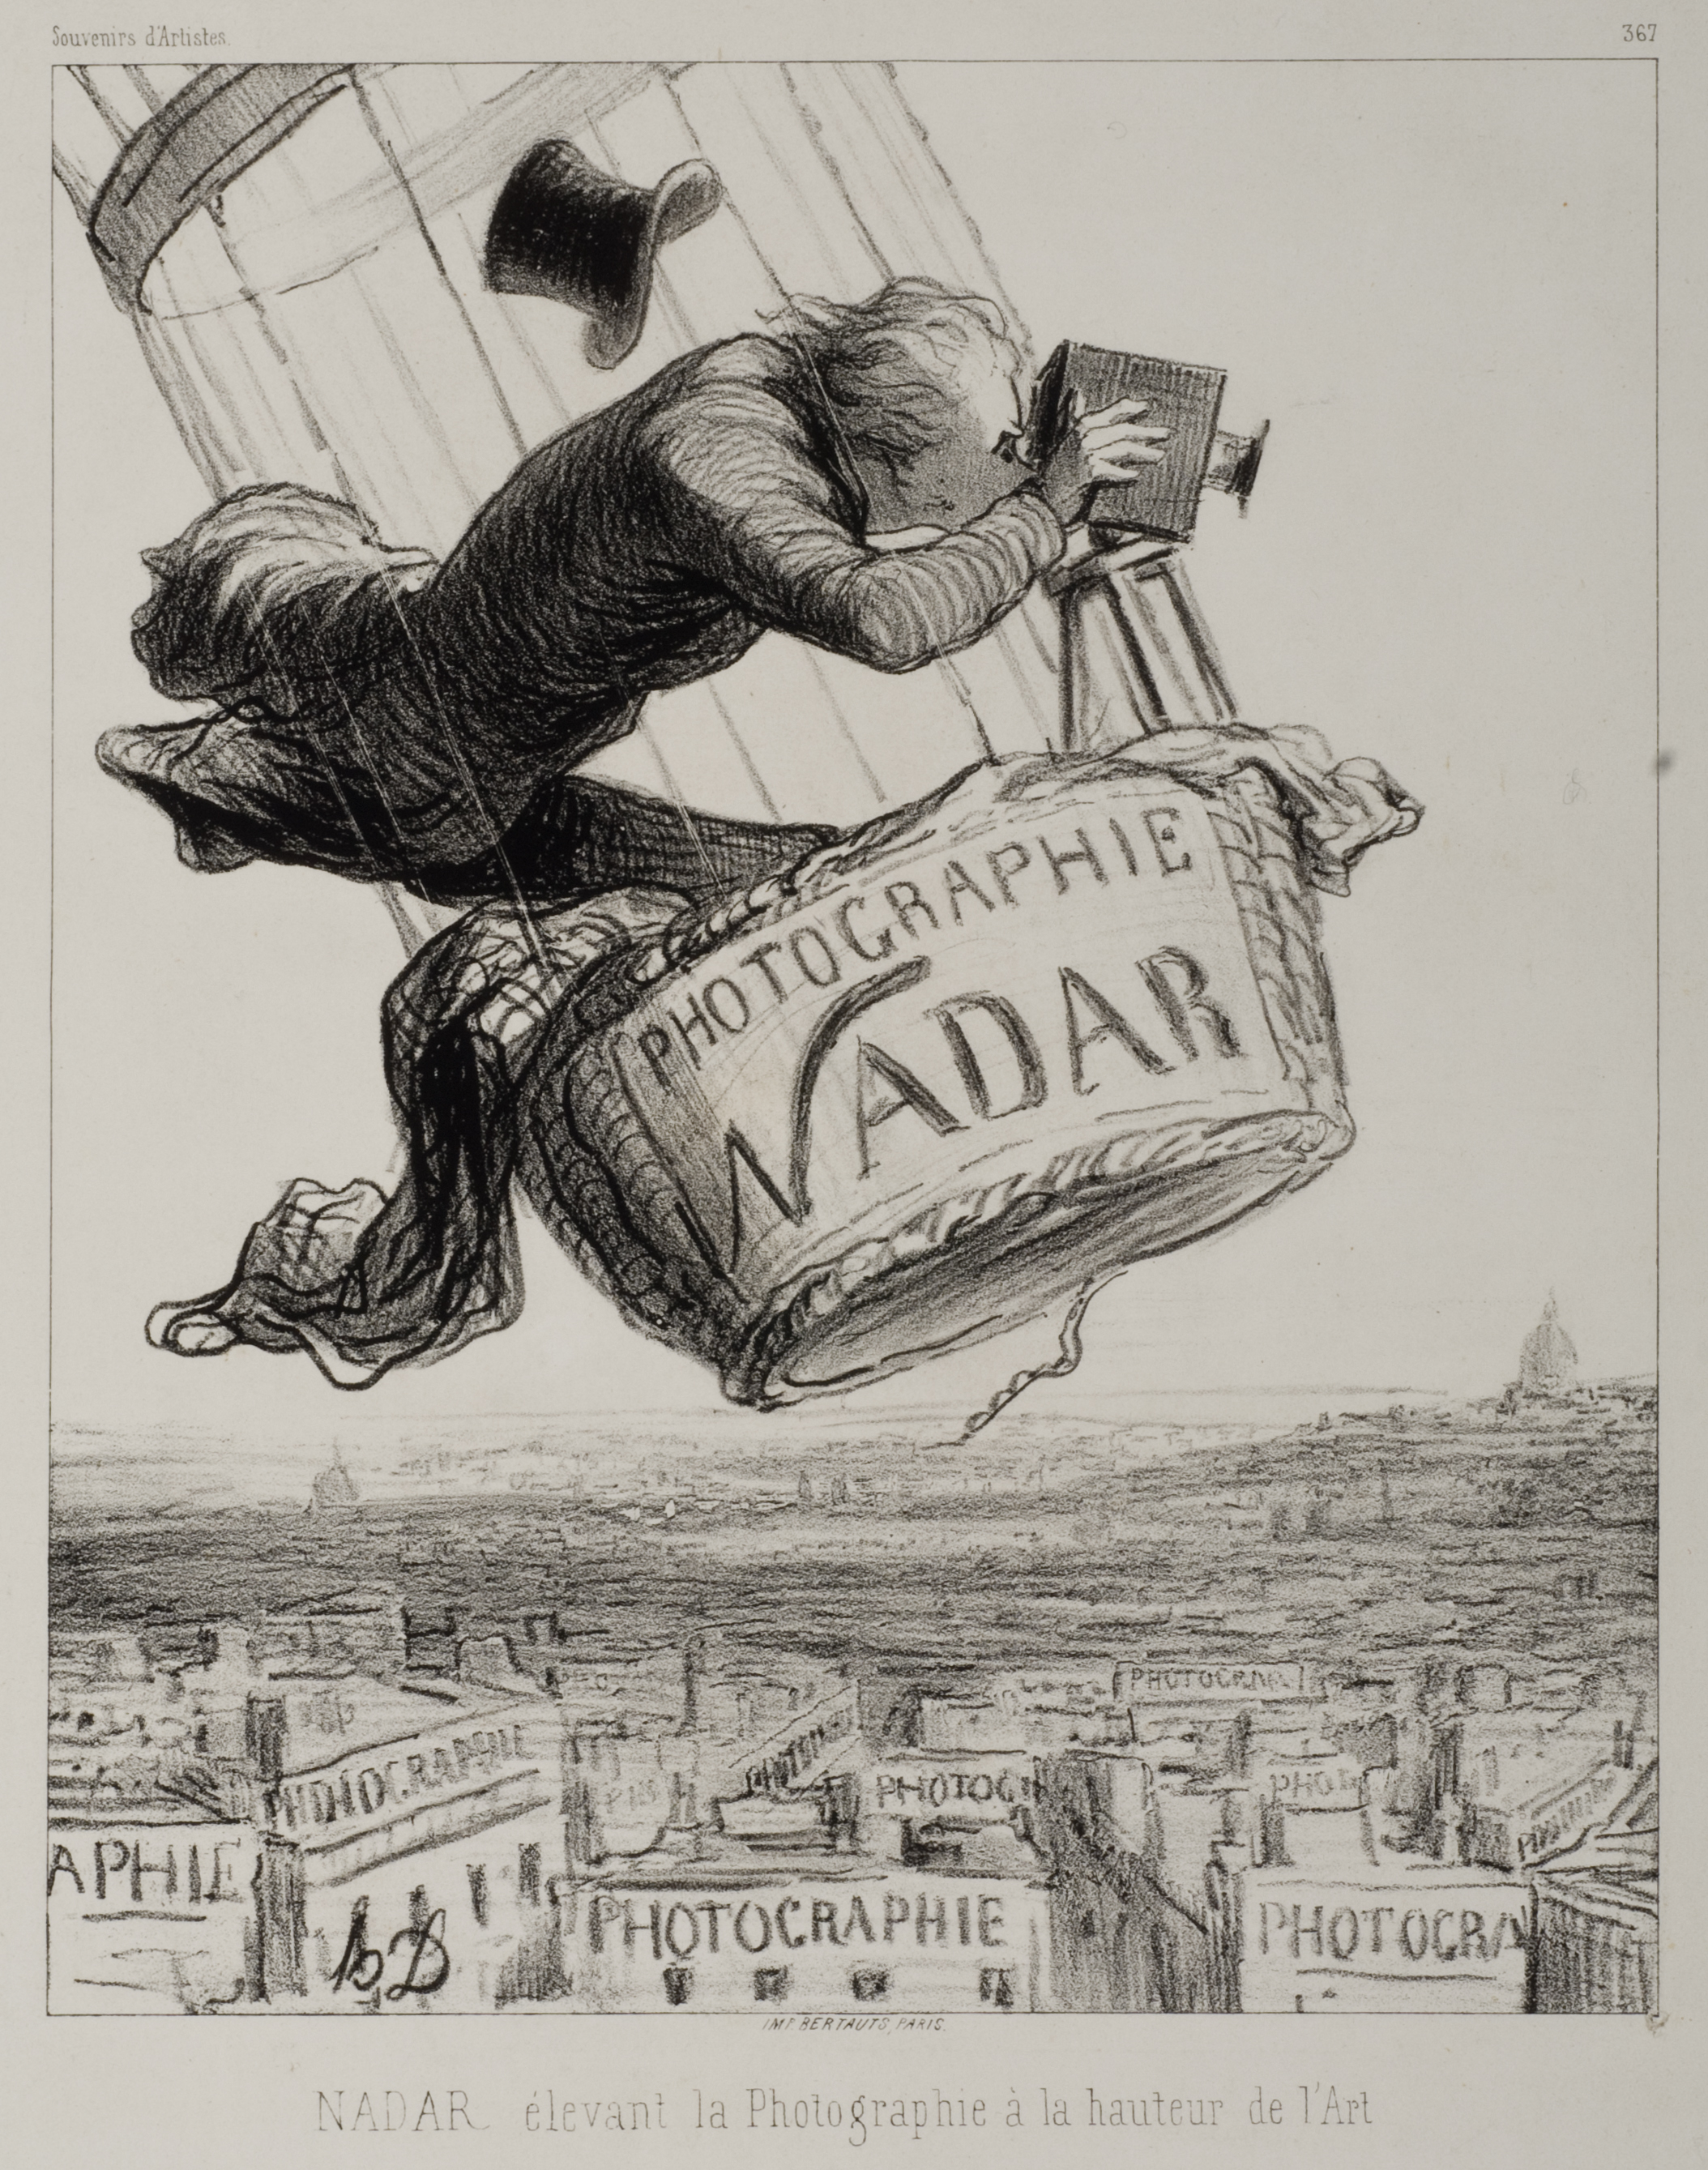 This satirical image shows Nadar with his hat blowing off in the basket of a hot air balloon looking in a large box camera. The basket has a sign attached reading, 'Photographie Nadar.' He floats above Paris, where most of the buildings have the word 'Photographie' inscribed on them.